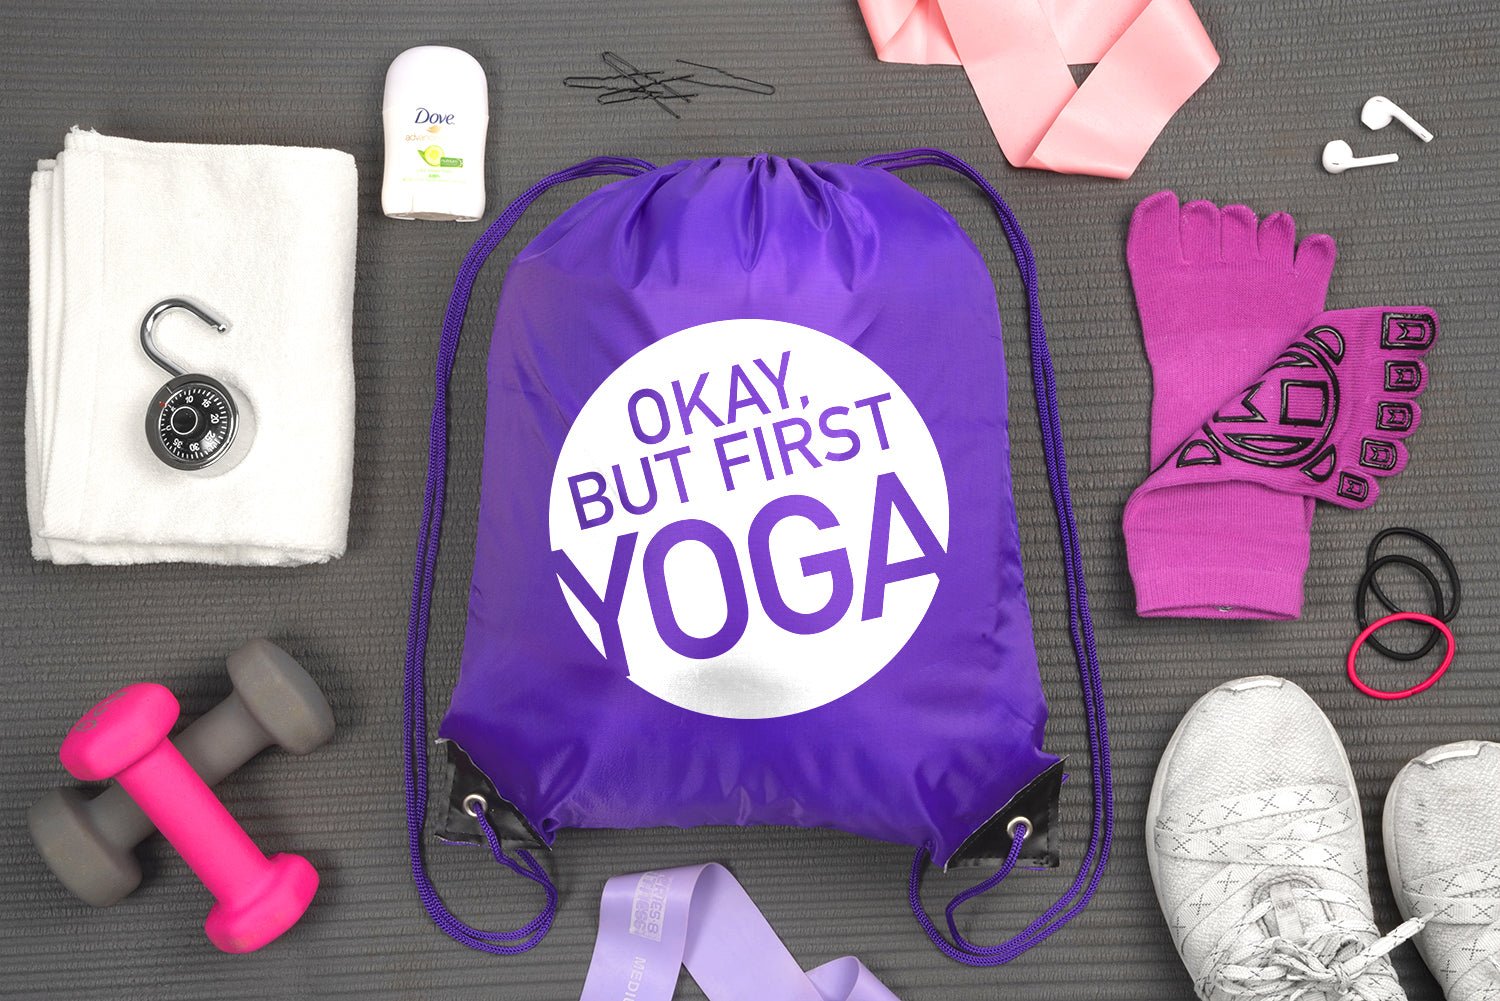 Yoga T Shirts & Accessories  Mato & Hash Funny Graphic Tees